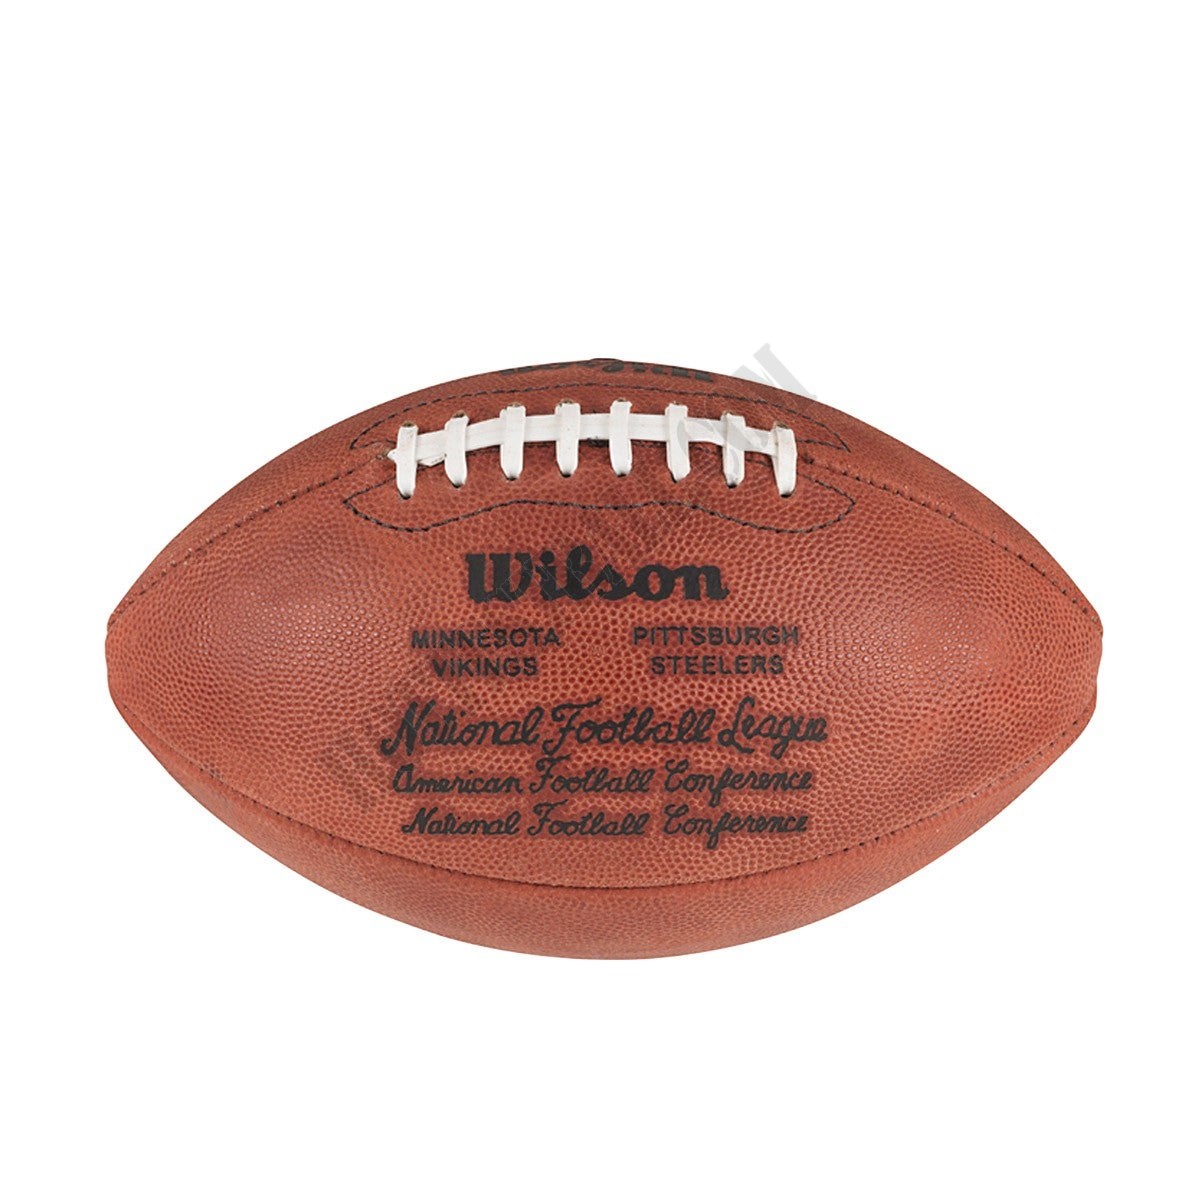 Super Bowl IX Game Football - Pittsburgh Steelers ● Wilson Promotions - -0